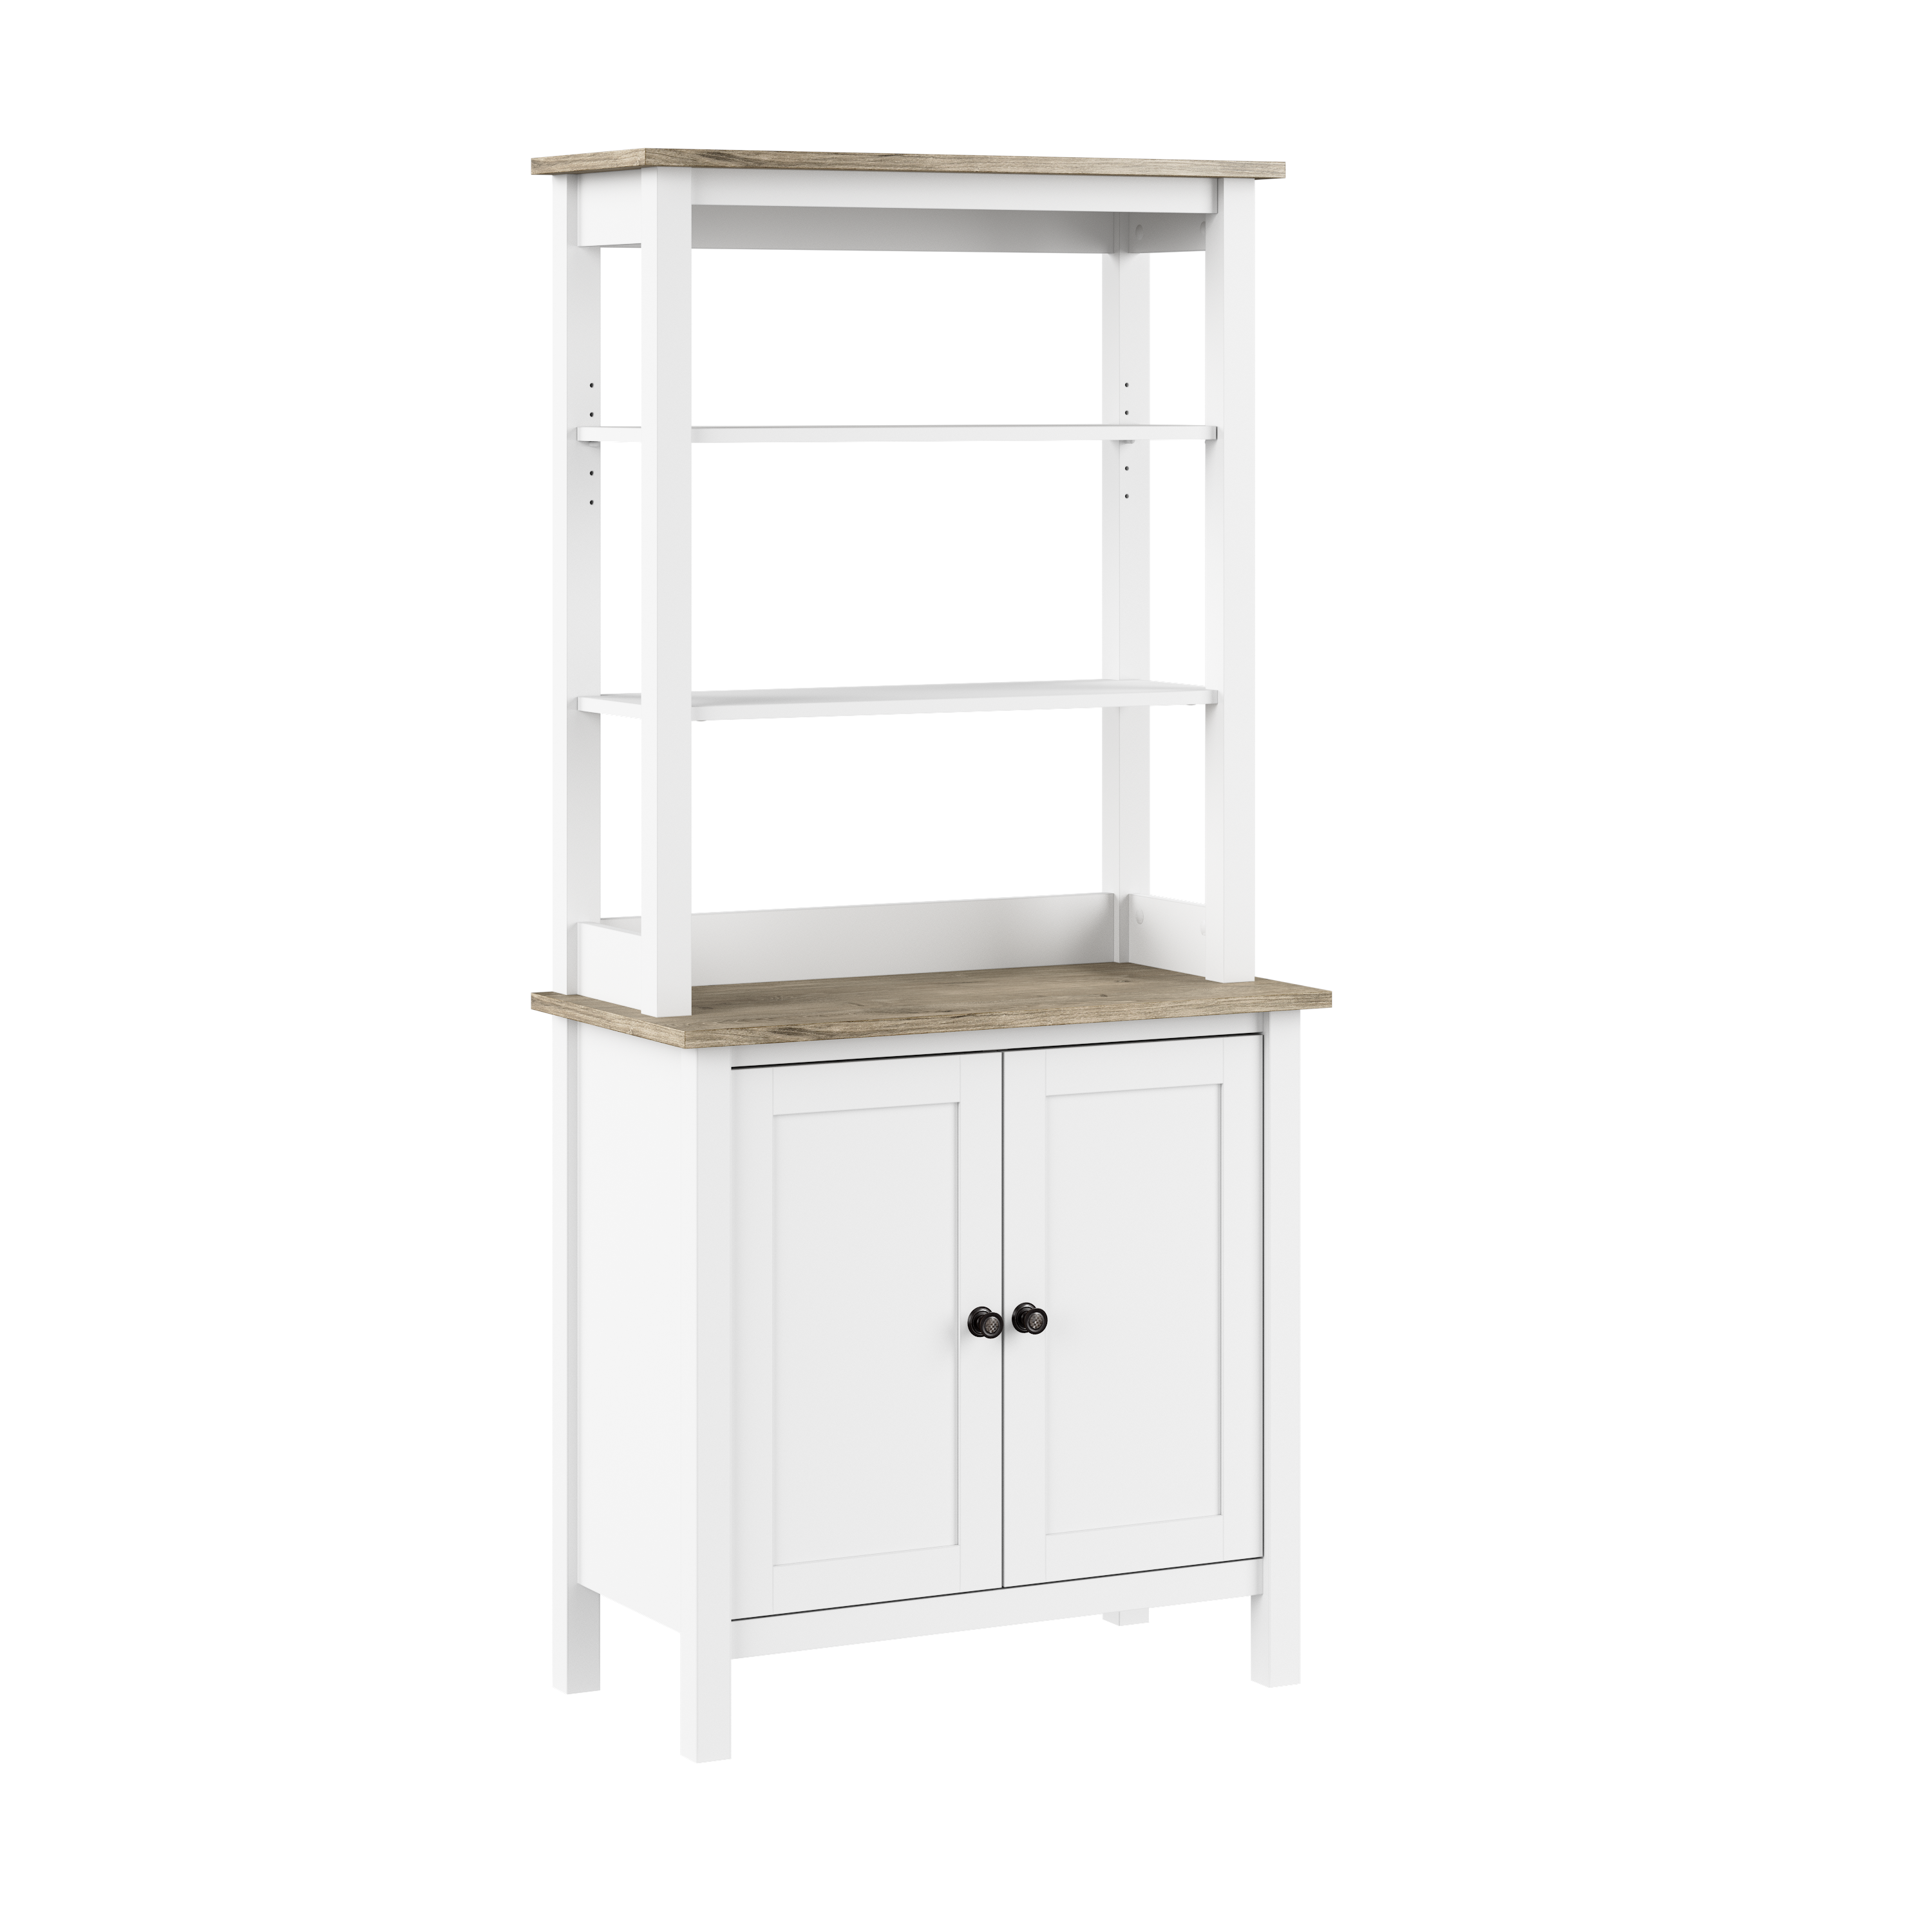 Shop Bush Furniture Mayfield 5 Shelf Bookcase with Doors 02 MAY019GW2 #color_shiplap gray/pure white